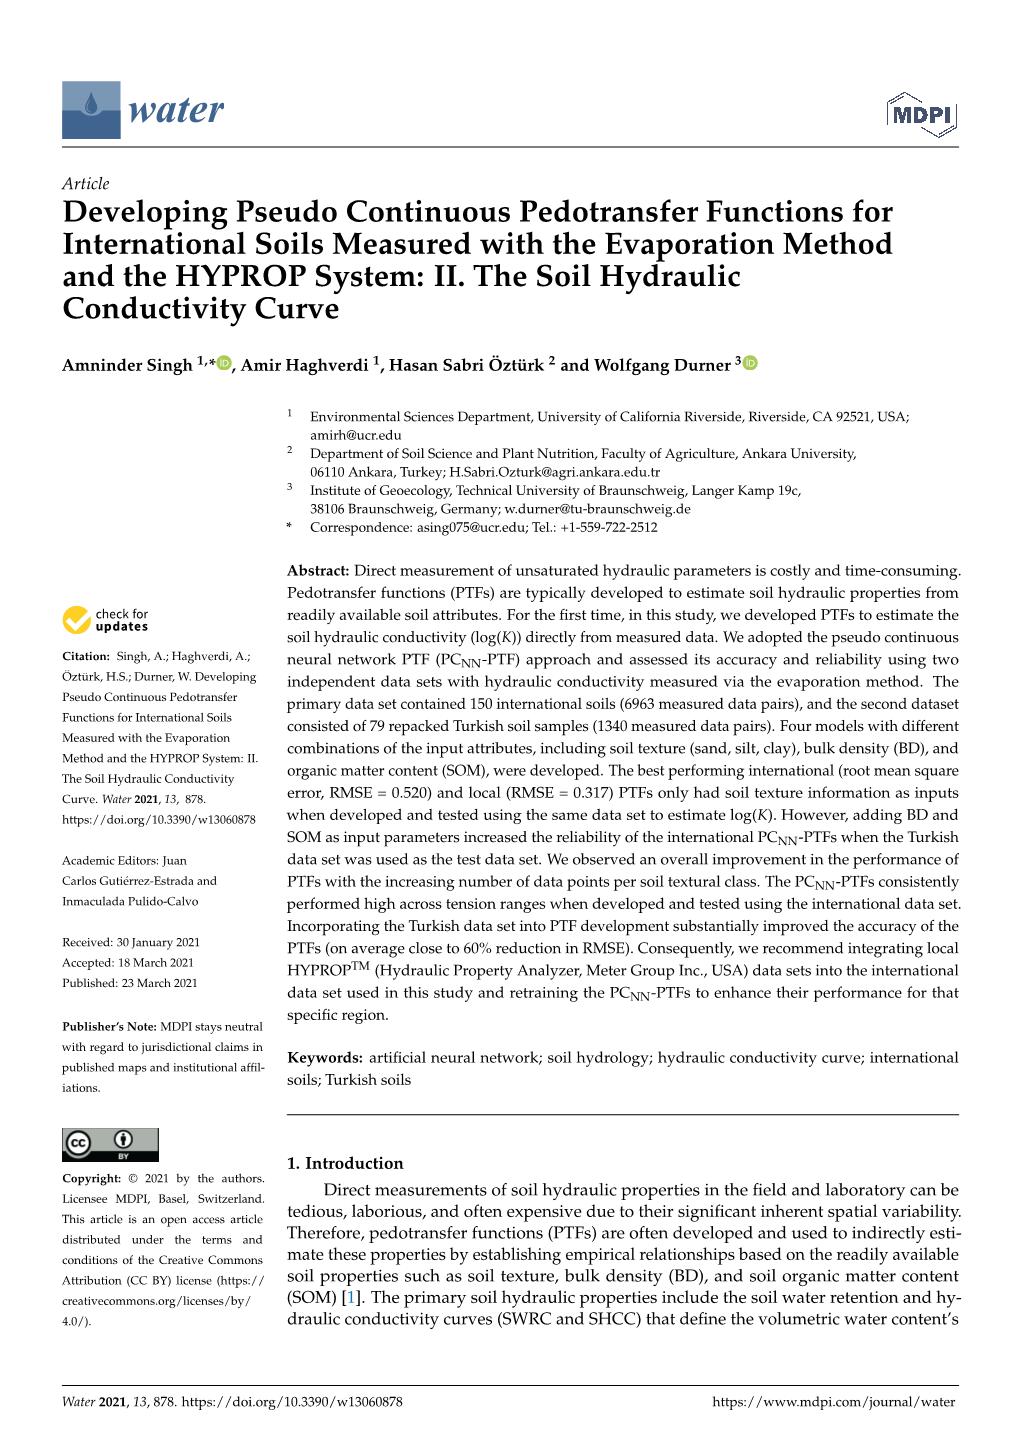 Developing Pseudo Continuous Pedotransfer Functions for International Soils Measured with the Evaporation Method and the HYPROP System: II